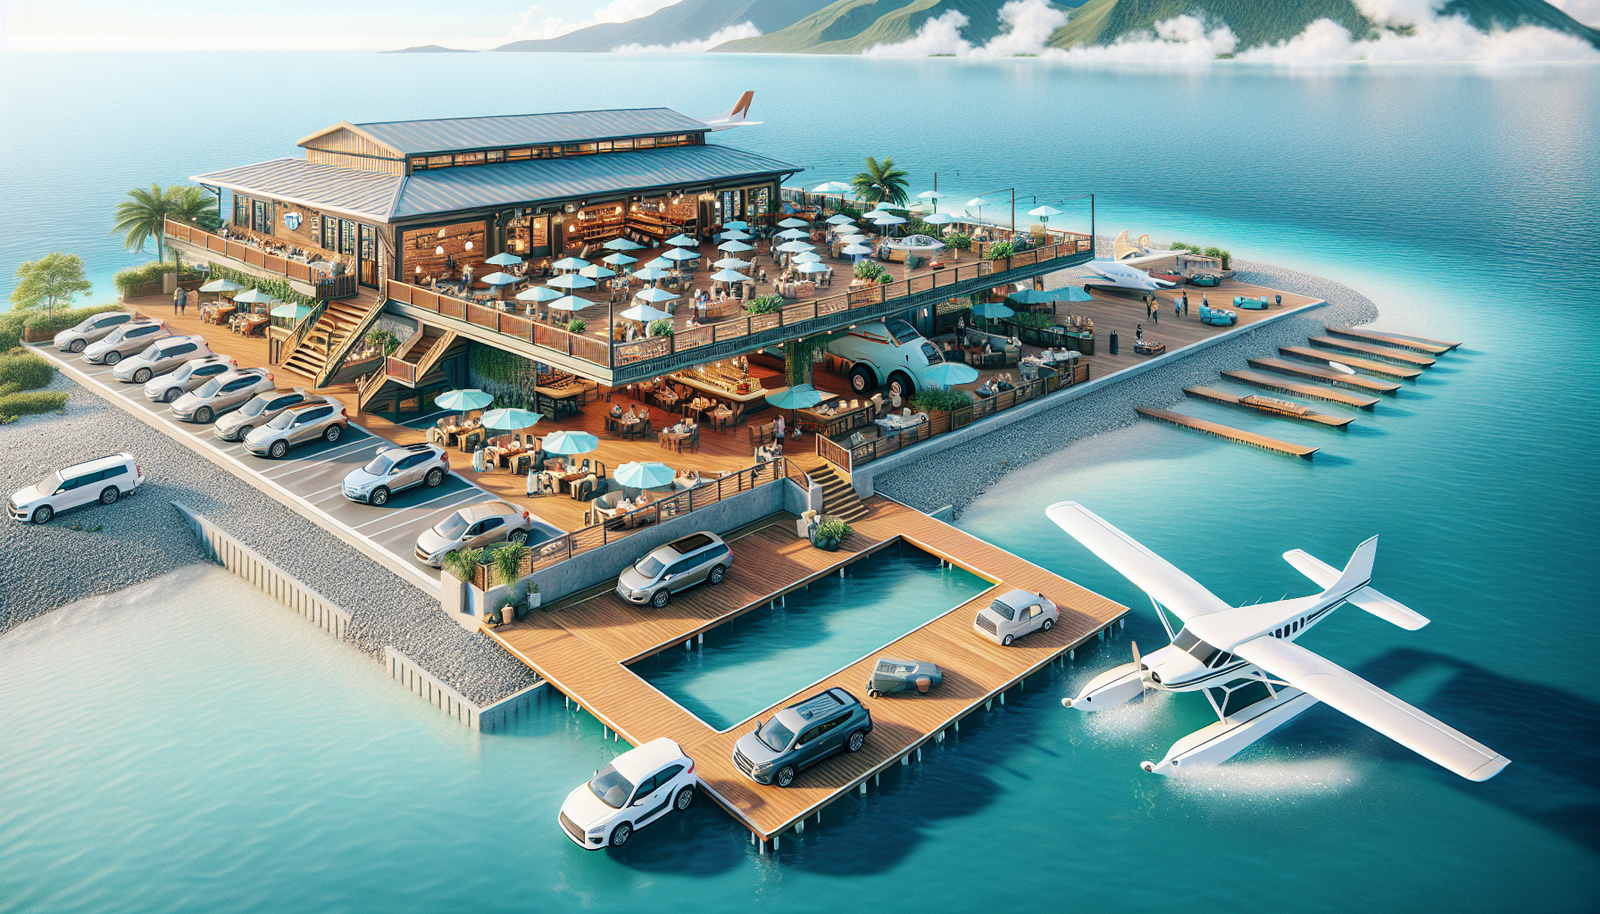 Seaplane terminal with complimentary amenities